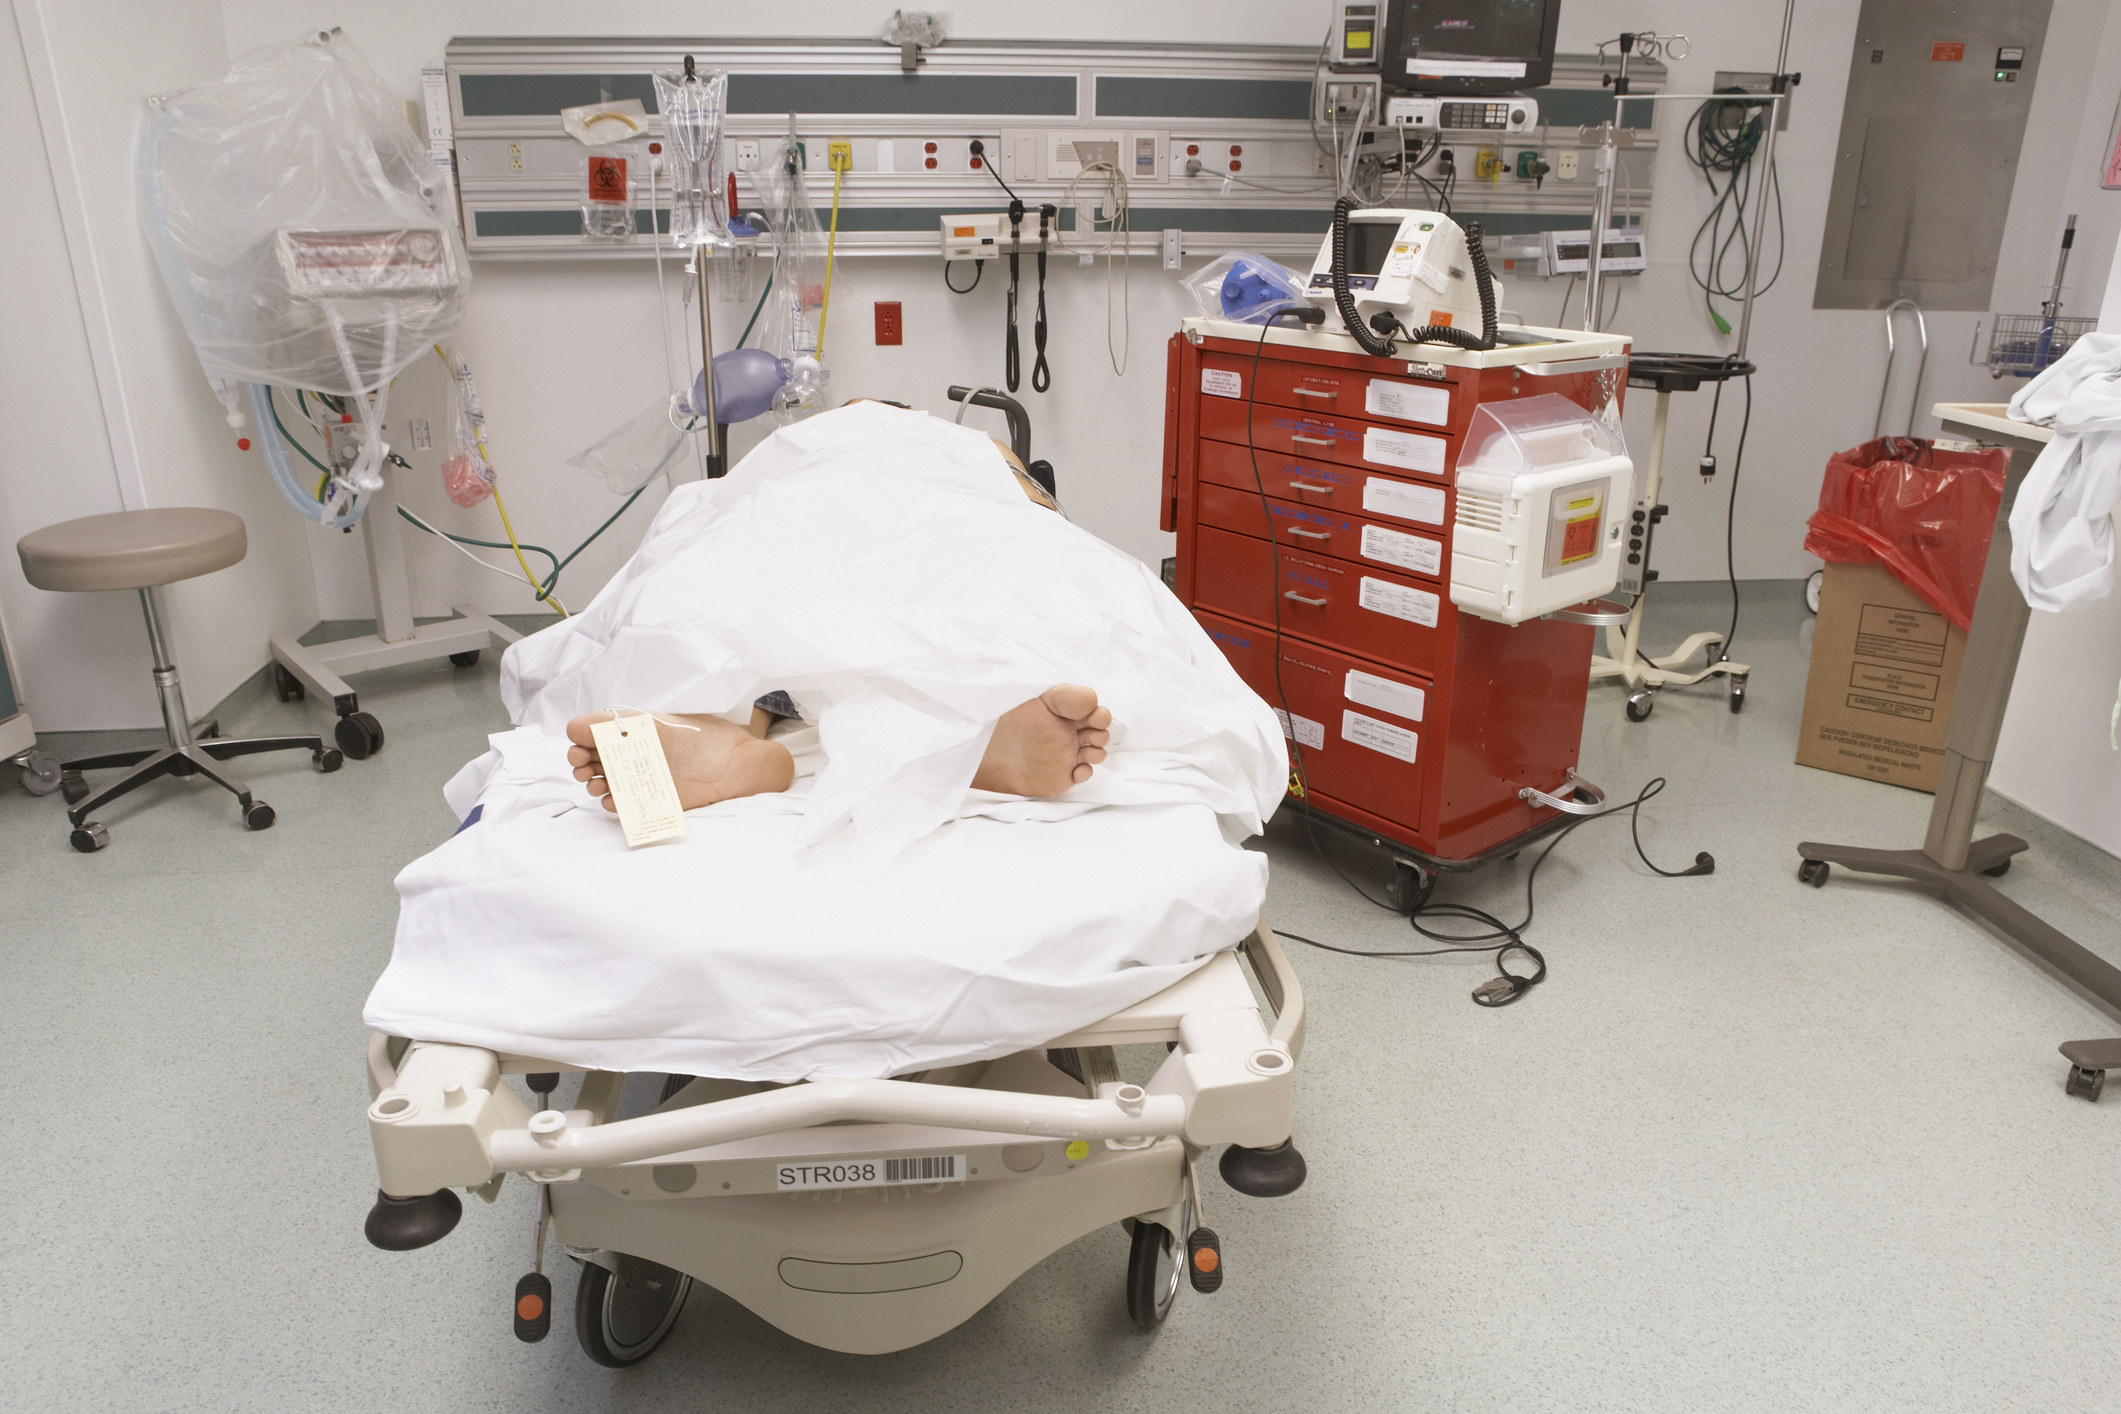 Corpse covered with a sheet lying on a hospital bed